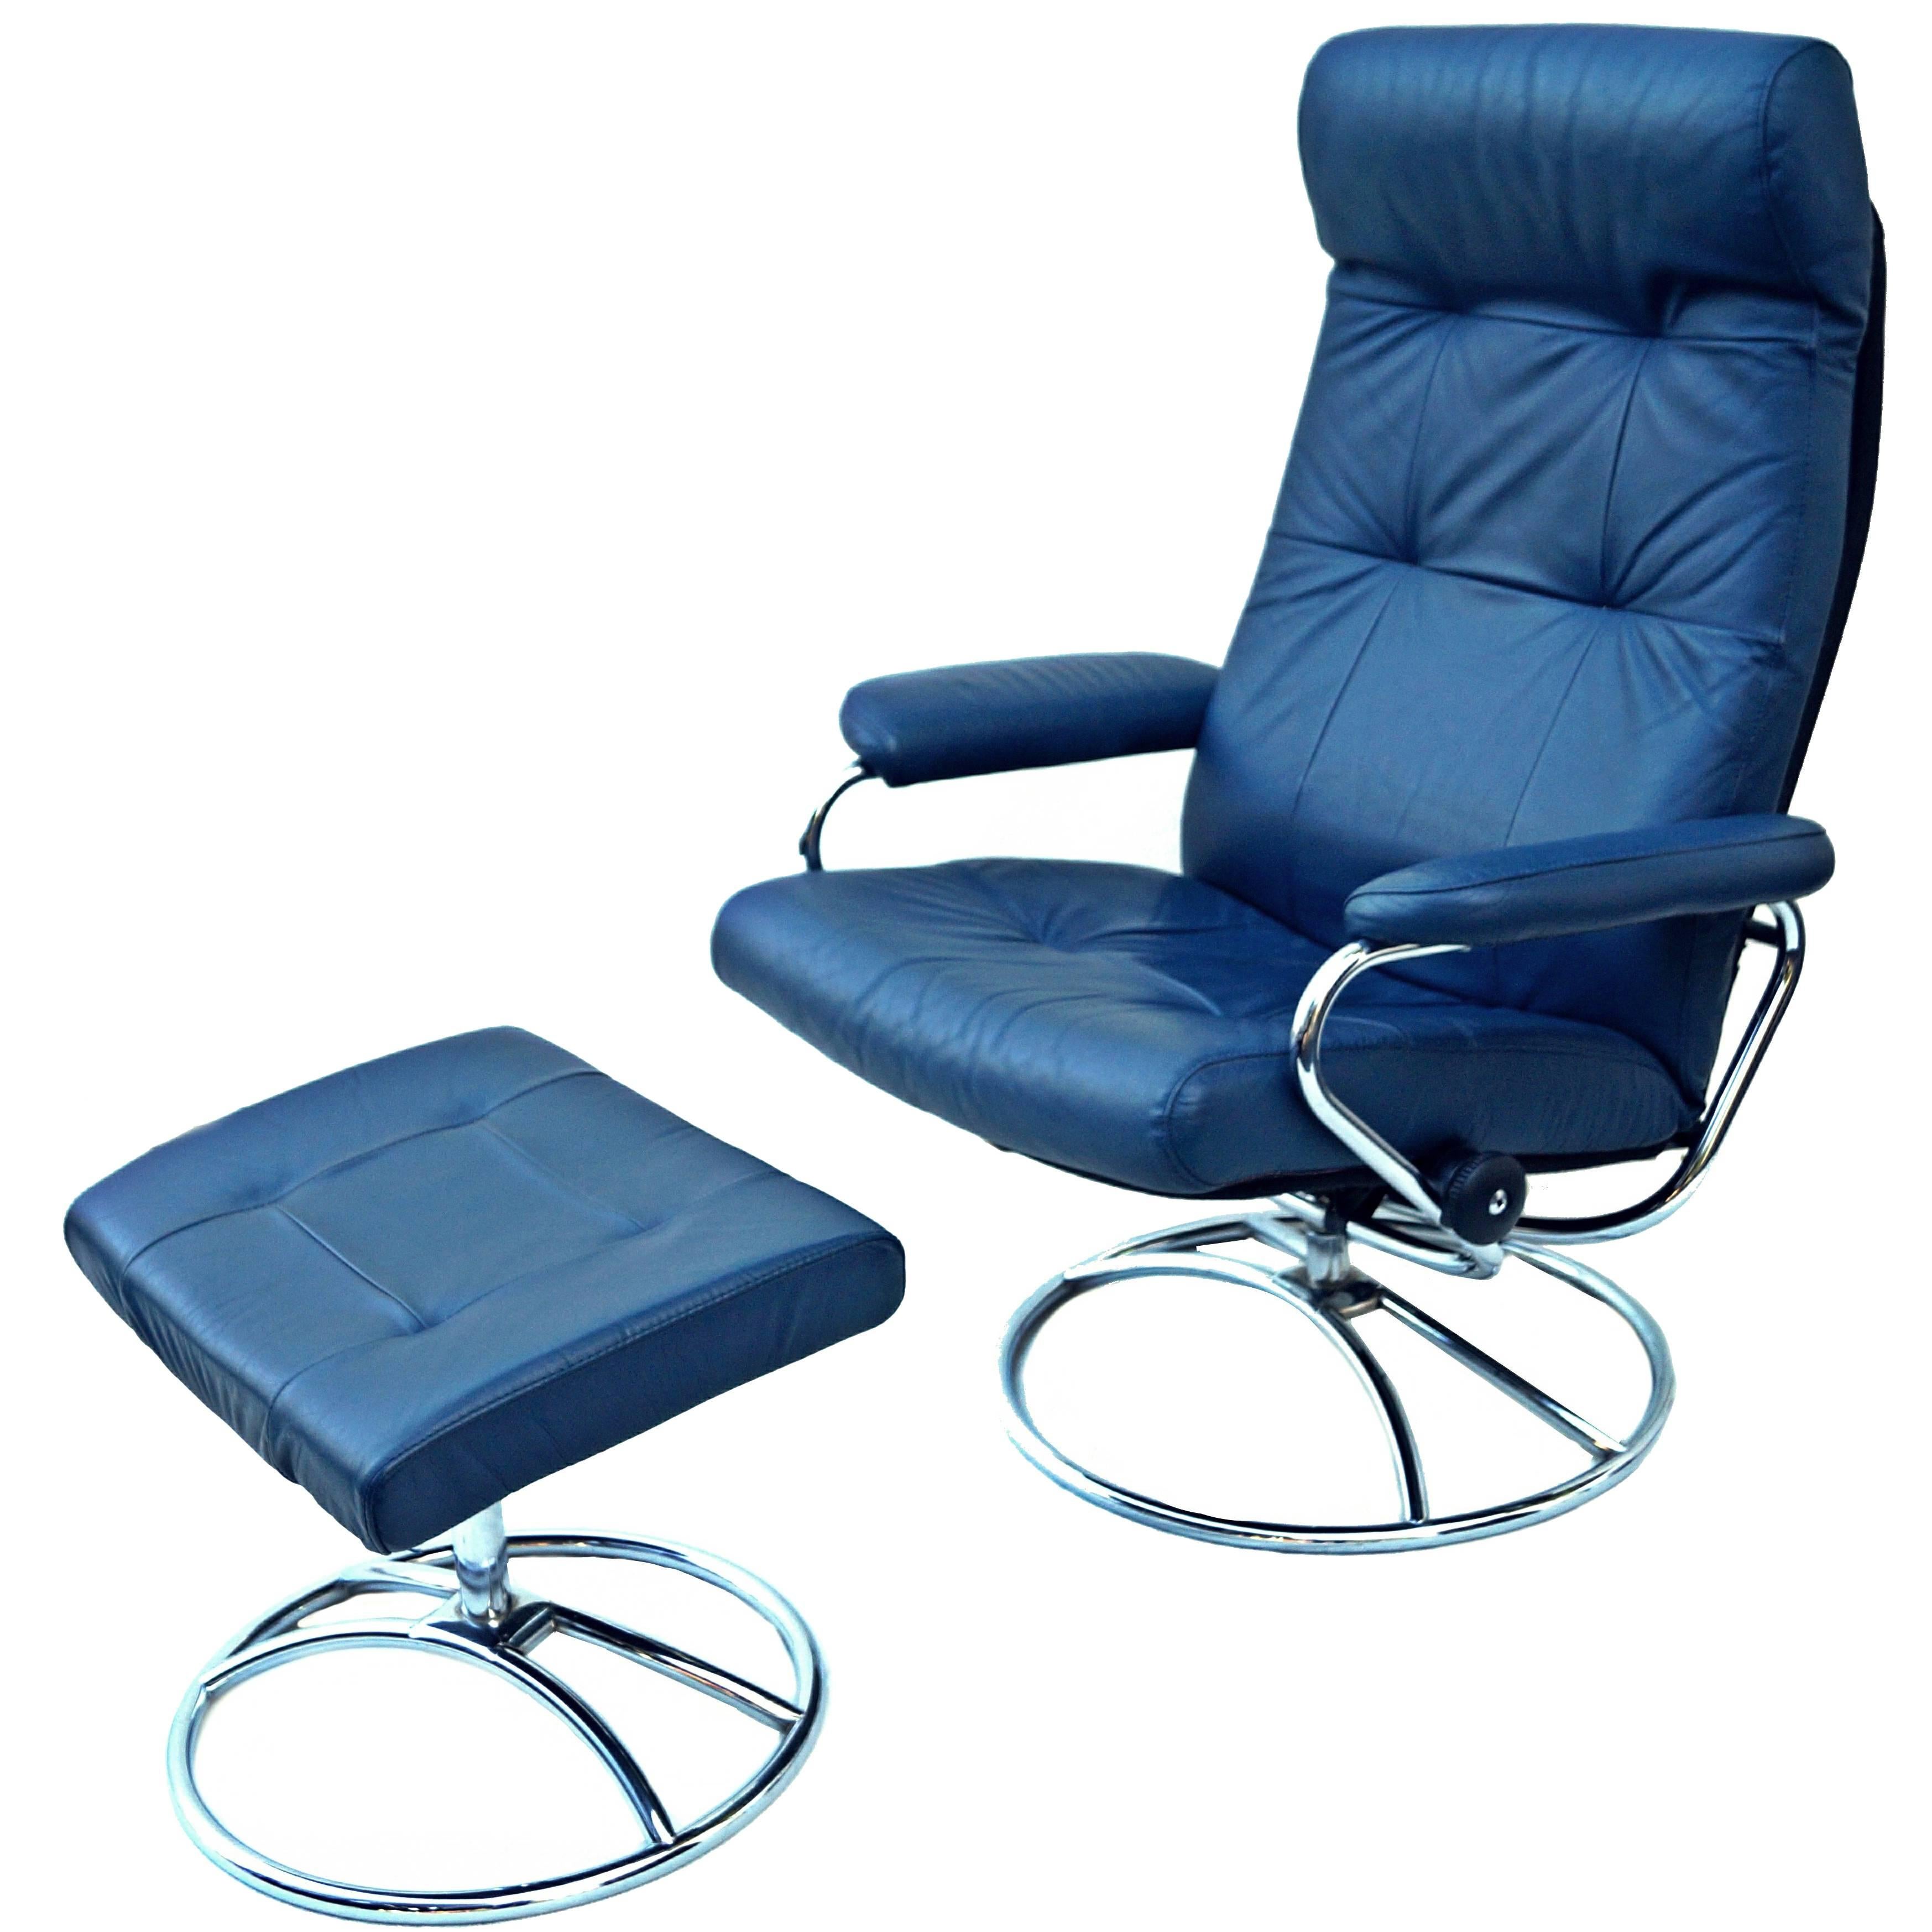 Ekornes Norwegian Blue Leather Lounge Chair and Ottoman